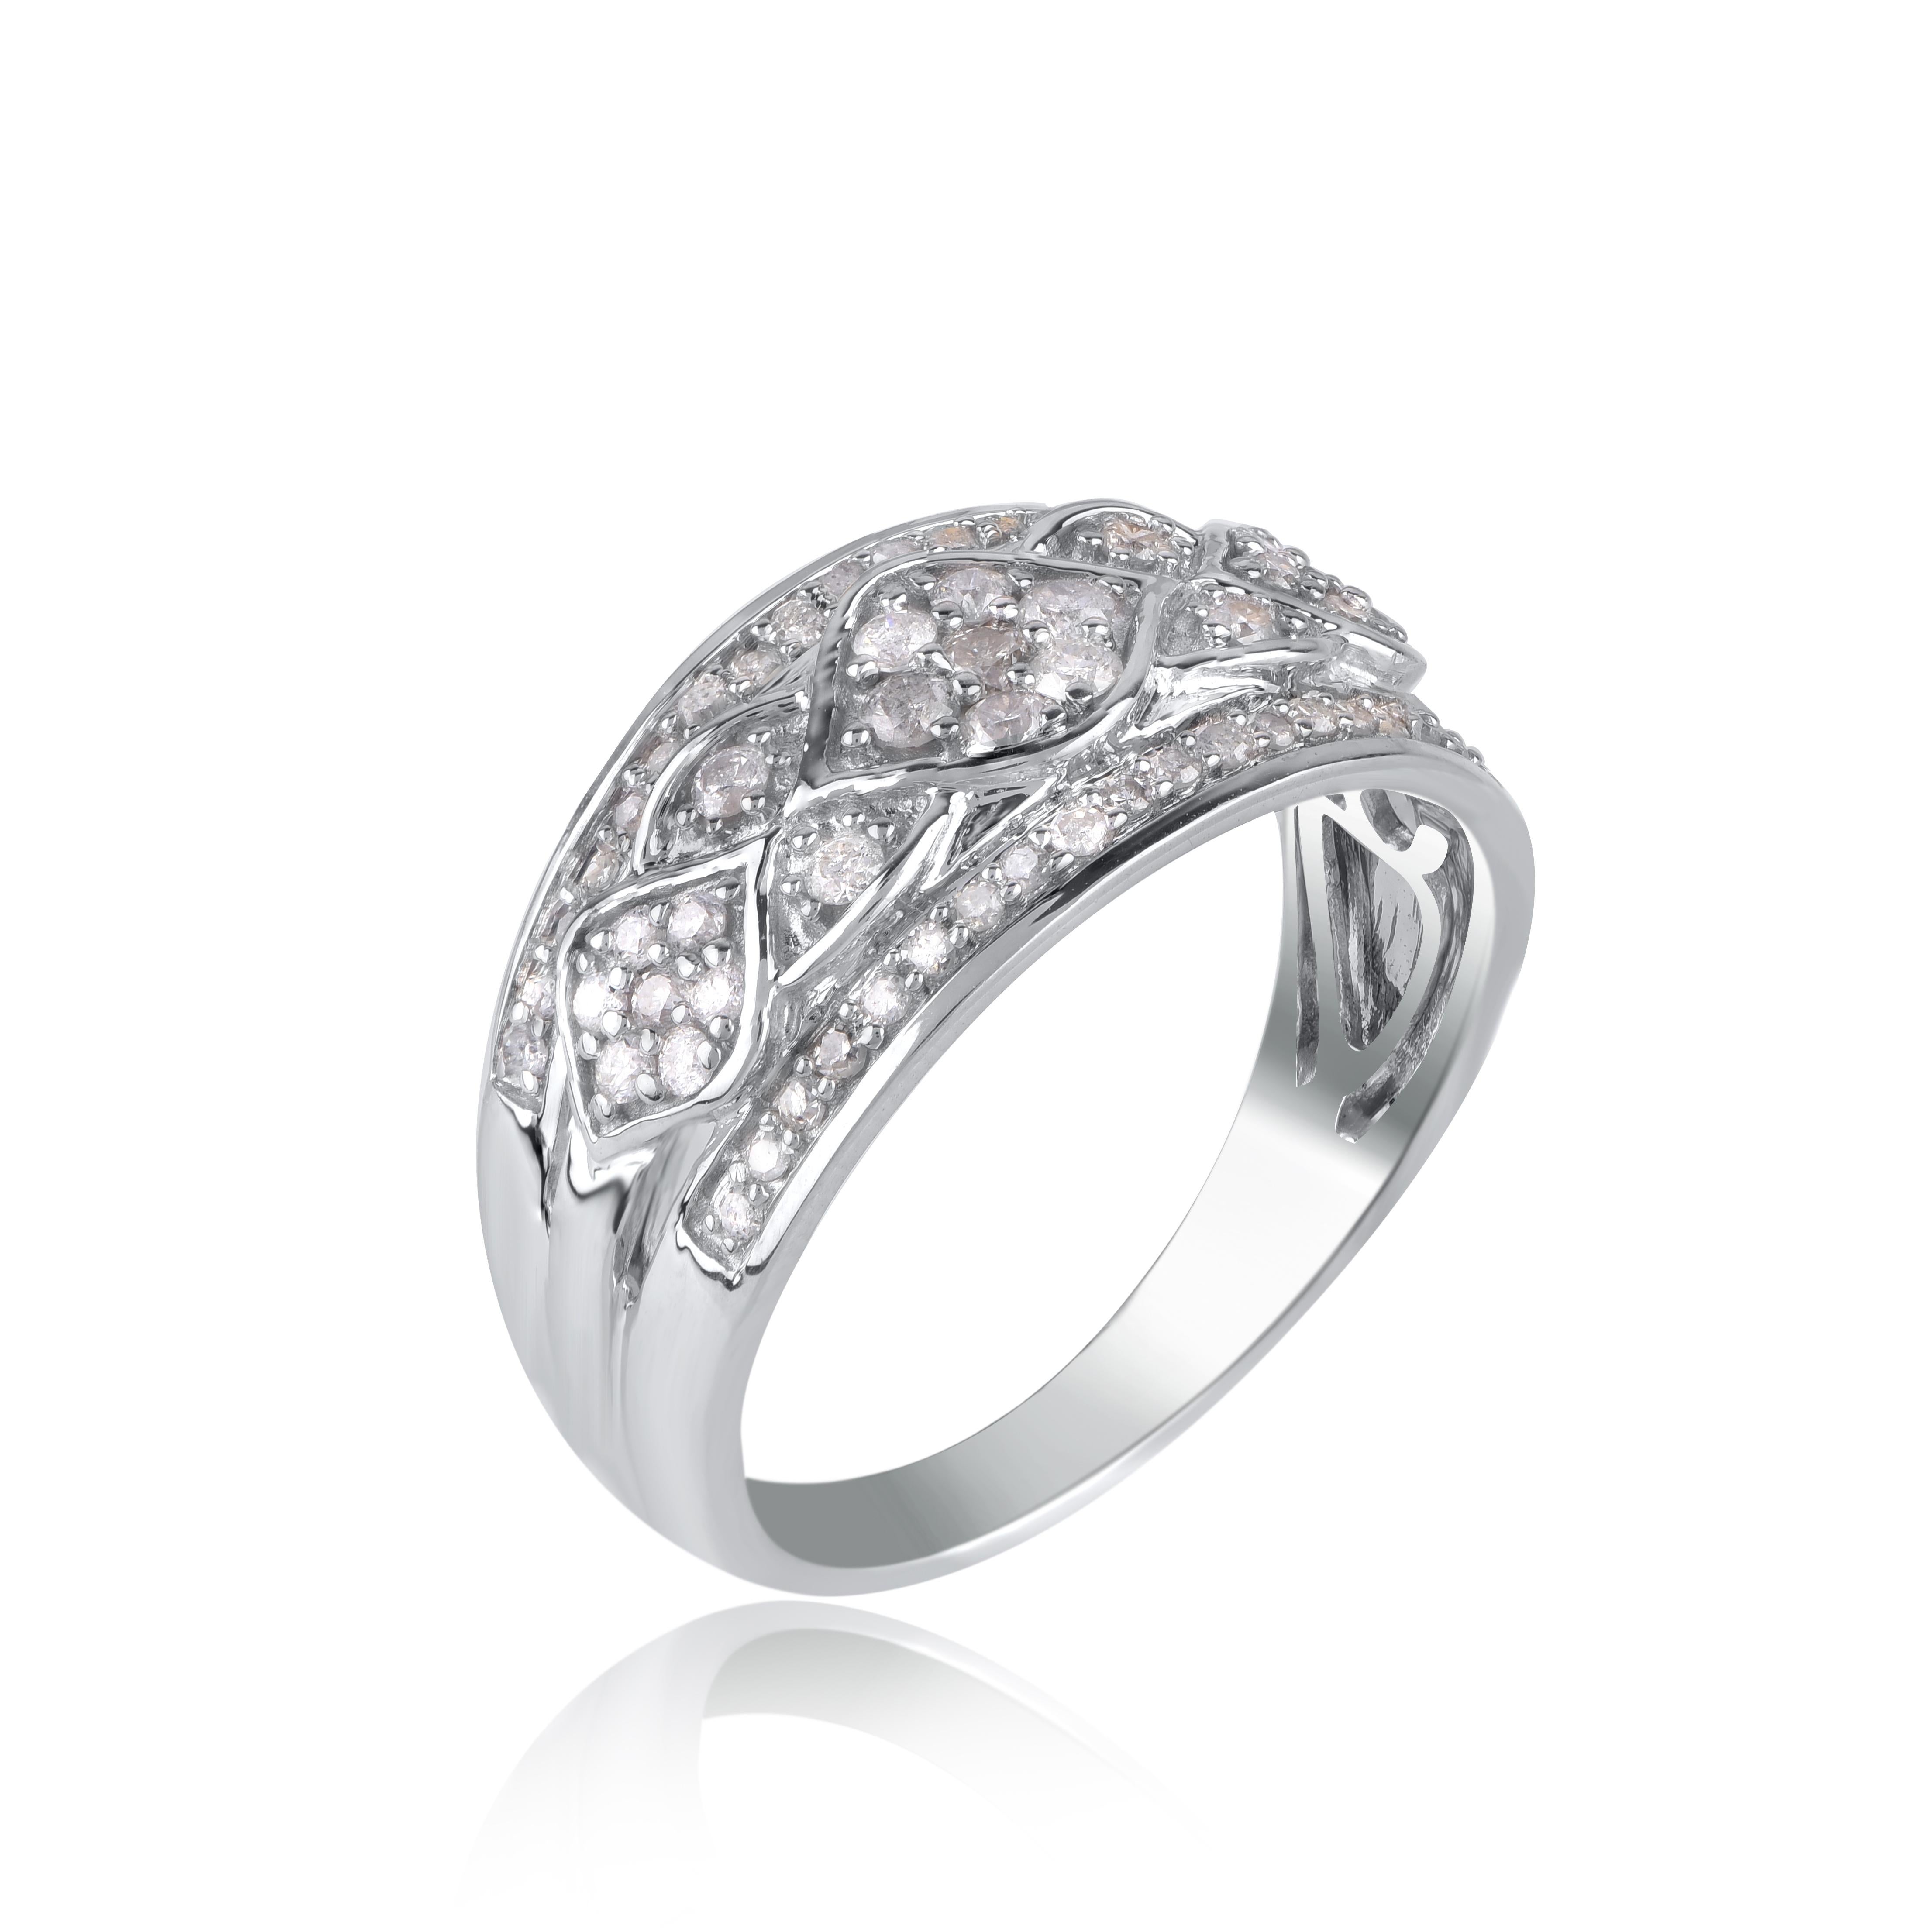 Honor your special day with this exceptional diamond band ring. This band ring features a sparkling 63 brilliant cut diamonds and single cut diamonds beautifully set in pave setting. The total diamond weight is 0.50 Carat. The diamonds are graded as